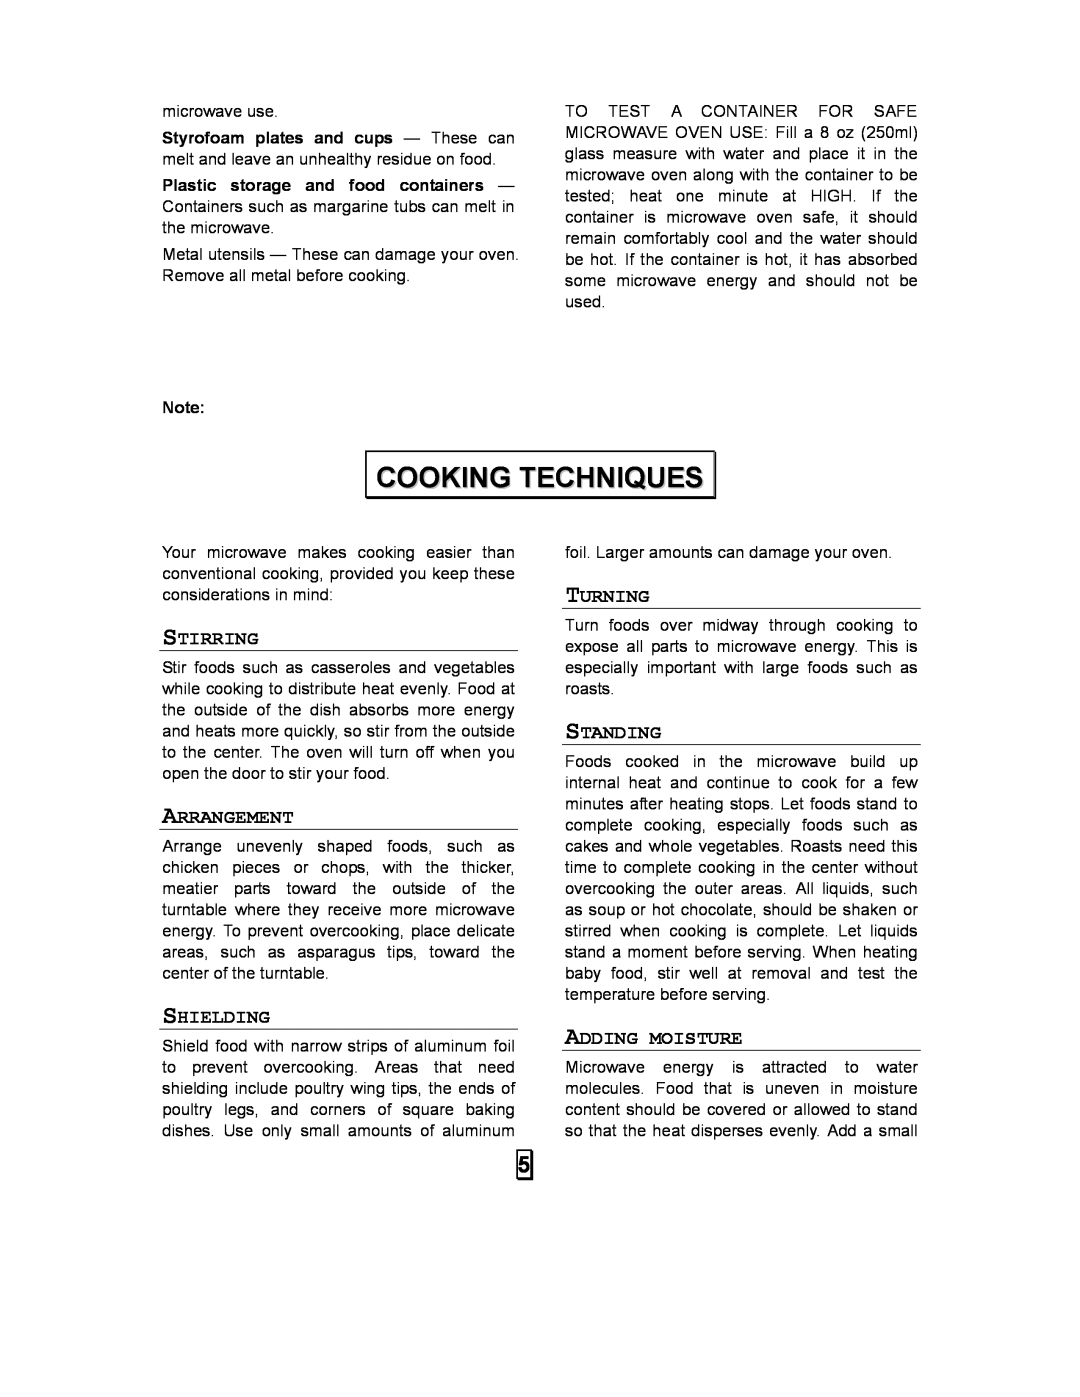 Kenmore 87103 user manual Cooking Techniques, Stirring, Arrangement, Shielding, Turning, Standing, Adding Moisture 